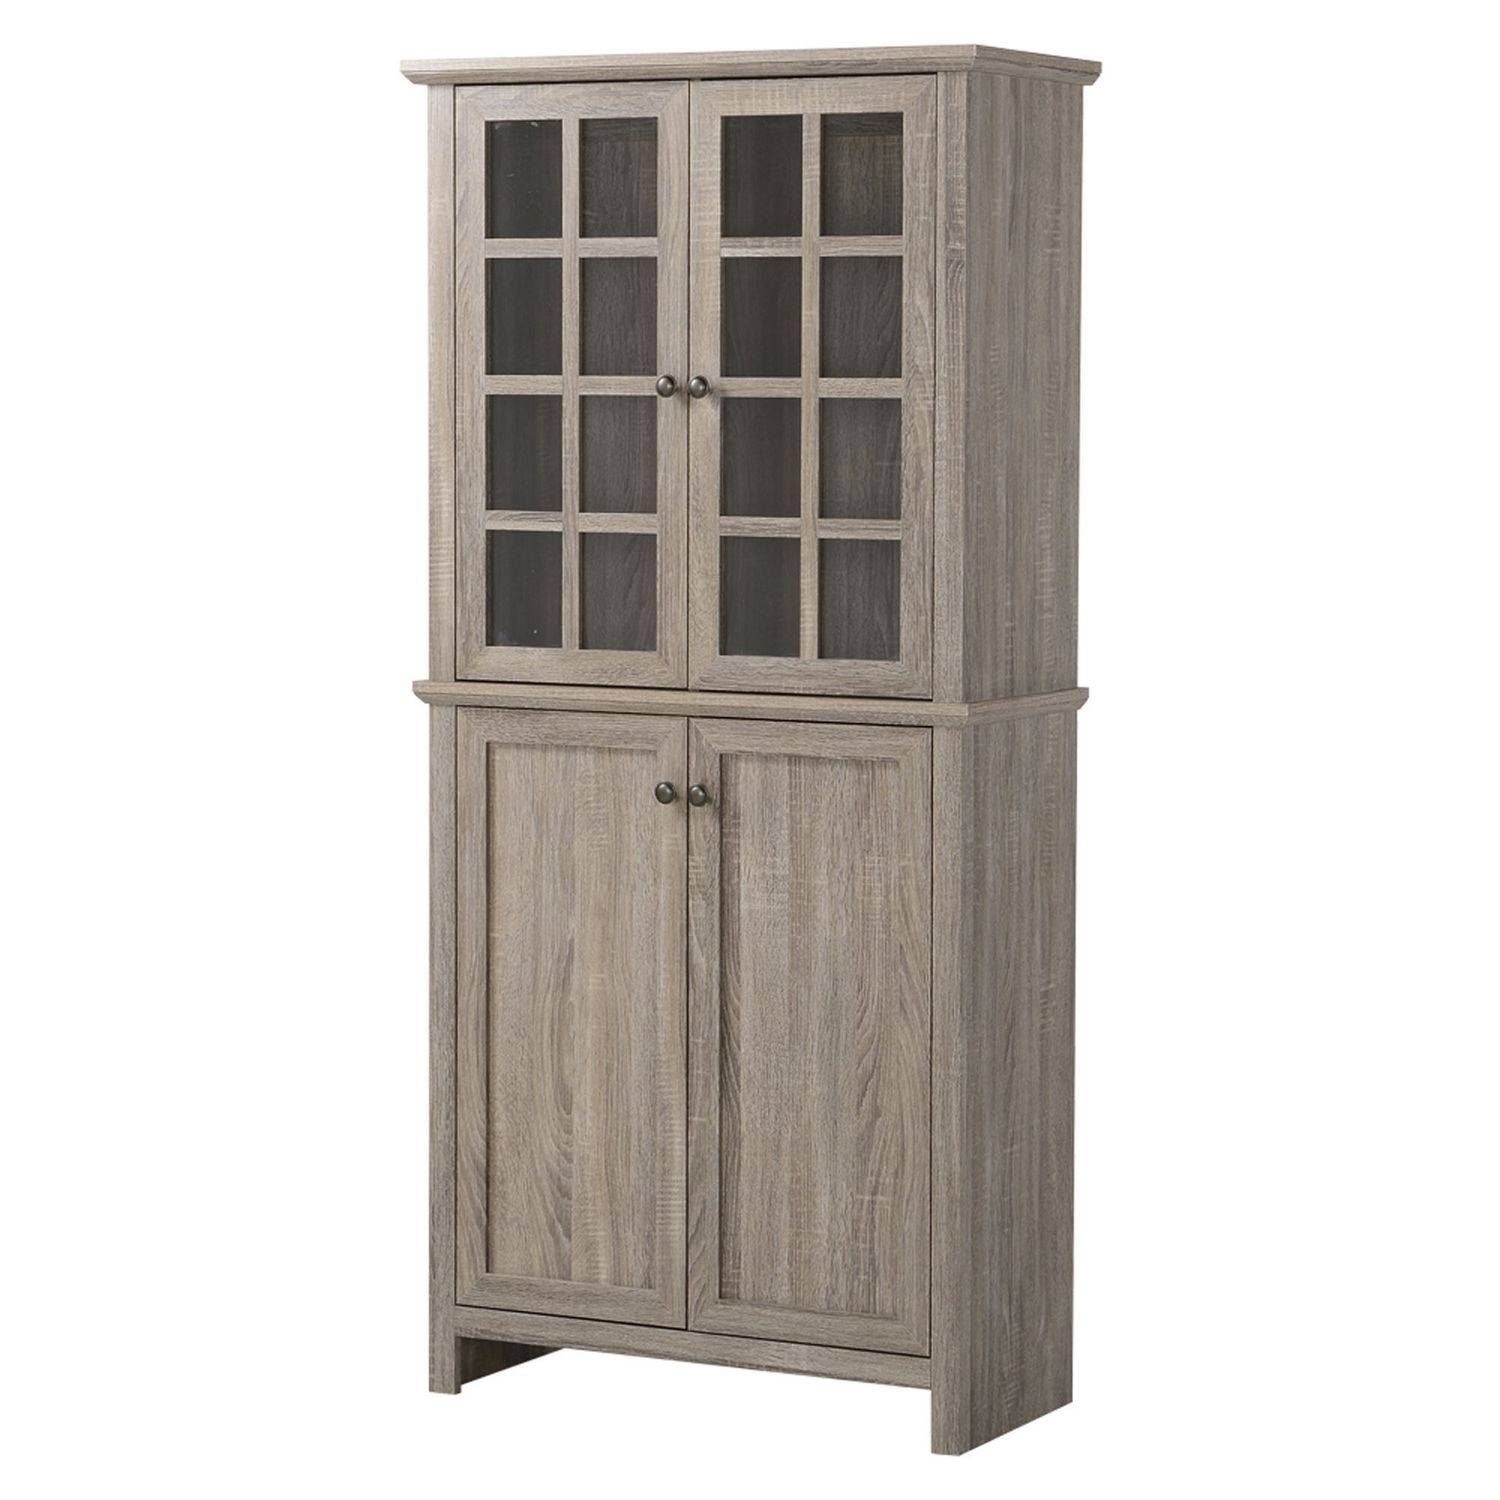 Kitchen : Kitchen Storage Units Credenzas And Sideboards Diy Within Amazon Furniture Sideboards (View 13 of 30)